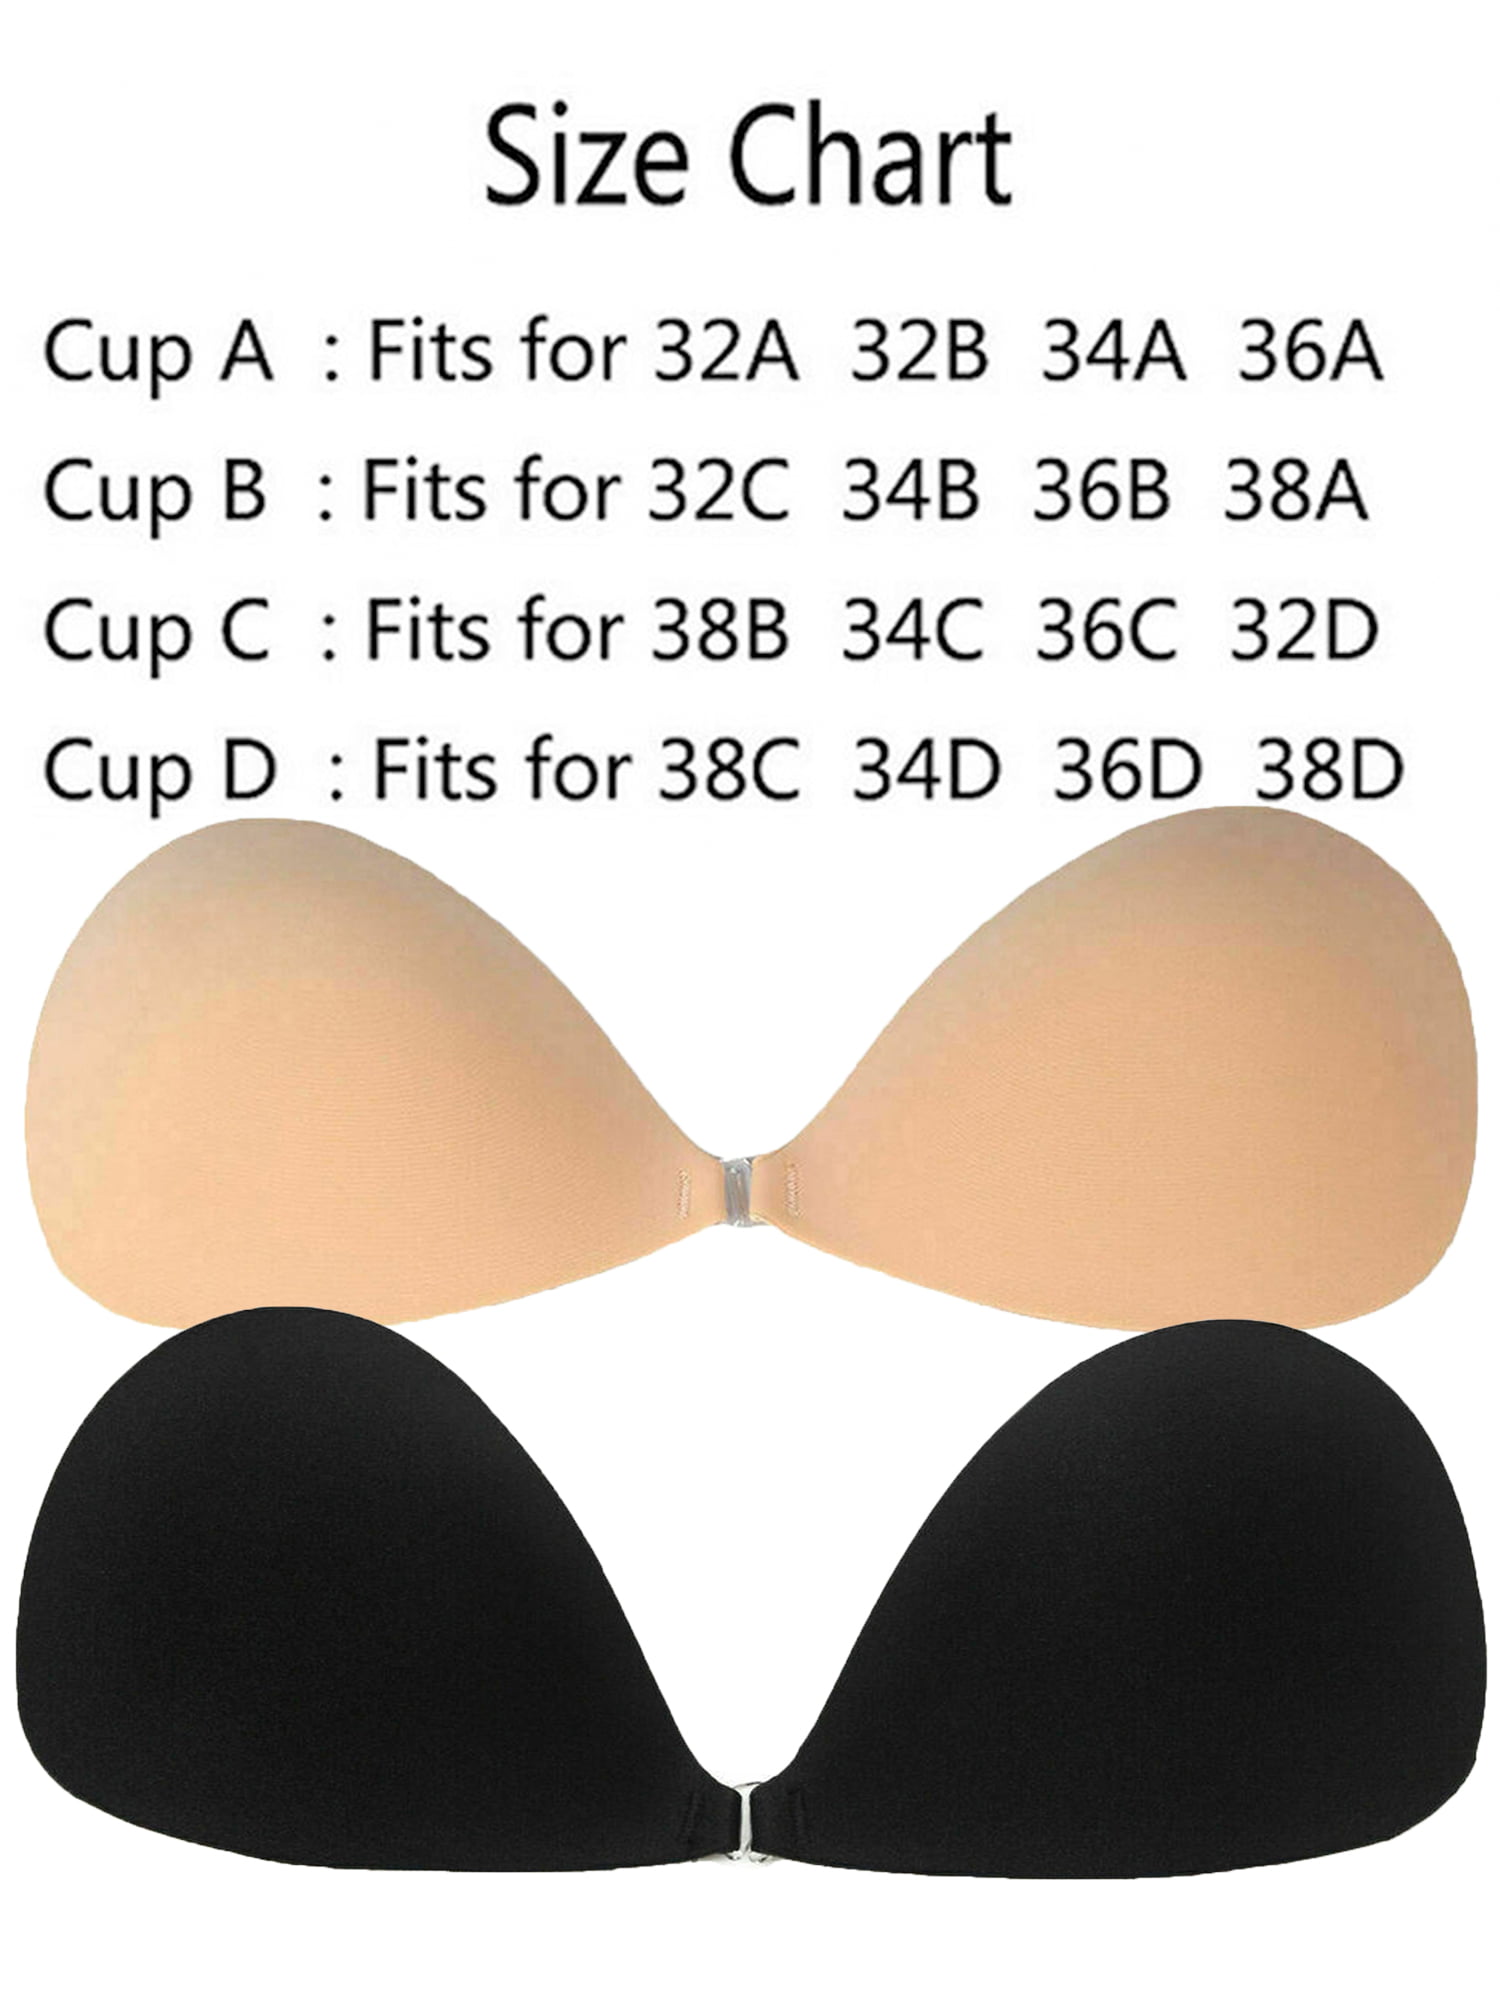 Breathable Silicone Push Up Bra For Women Seamless, Strapless, And Invisible  Adjustable Rope Lightweight And Comfortable One Piece Brassiere Wire Free  From Daylight, $4.41